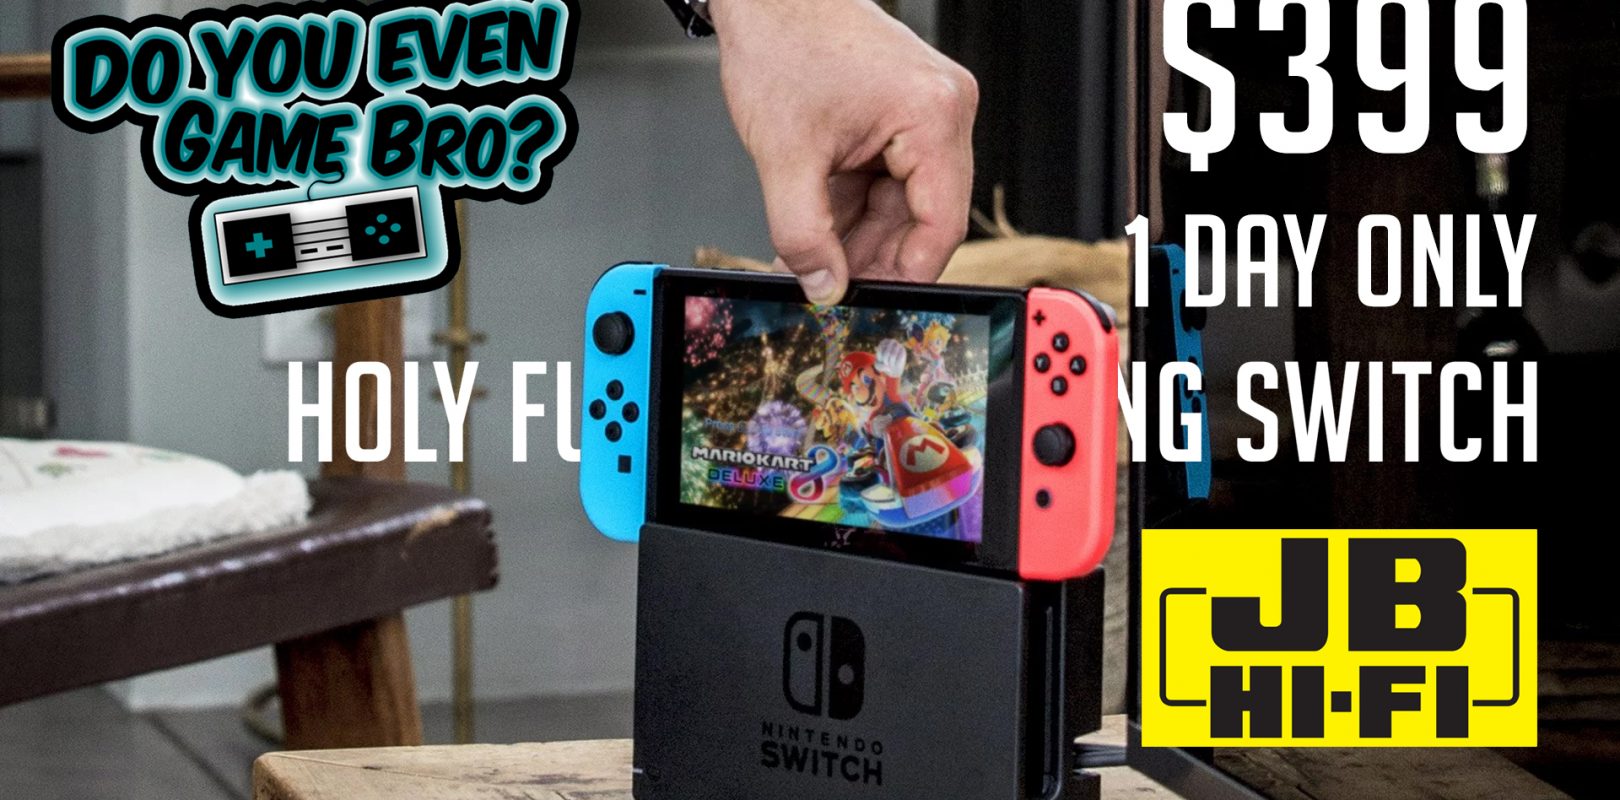 Jb Hifi Are Selling The Nintendo Switch For 399 One Day Only